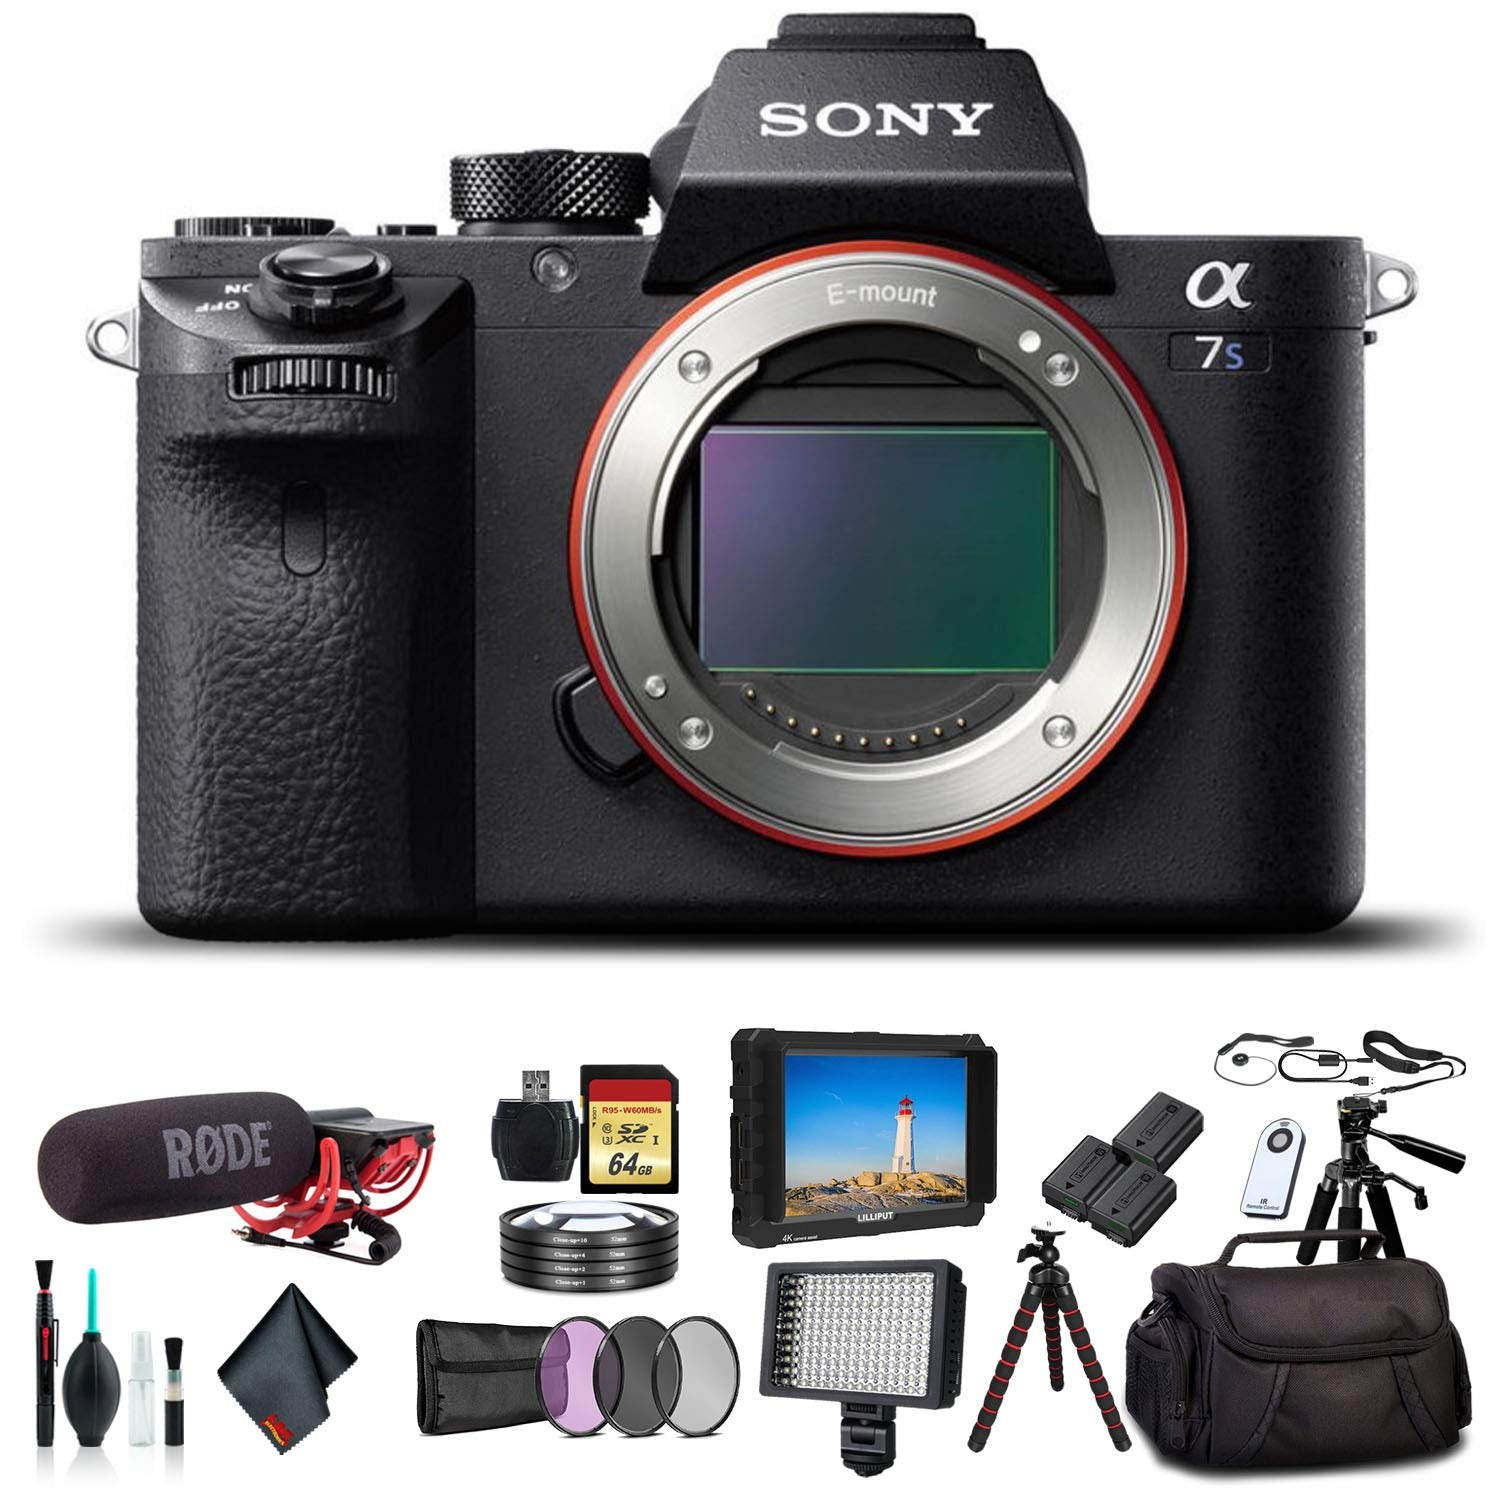 Sony Alpha a7S II Mirrorless Camera ILCE7SM2/B With Soft Bag, 2x Extra Batteries, Rode Mic, LED Light, External Monitor, 2x 64GB Memory Card, Sling Soft Bag, Card Reader , Plus Essential Accessories